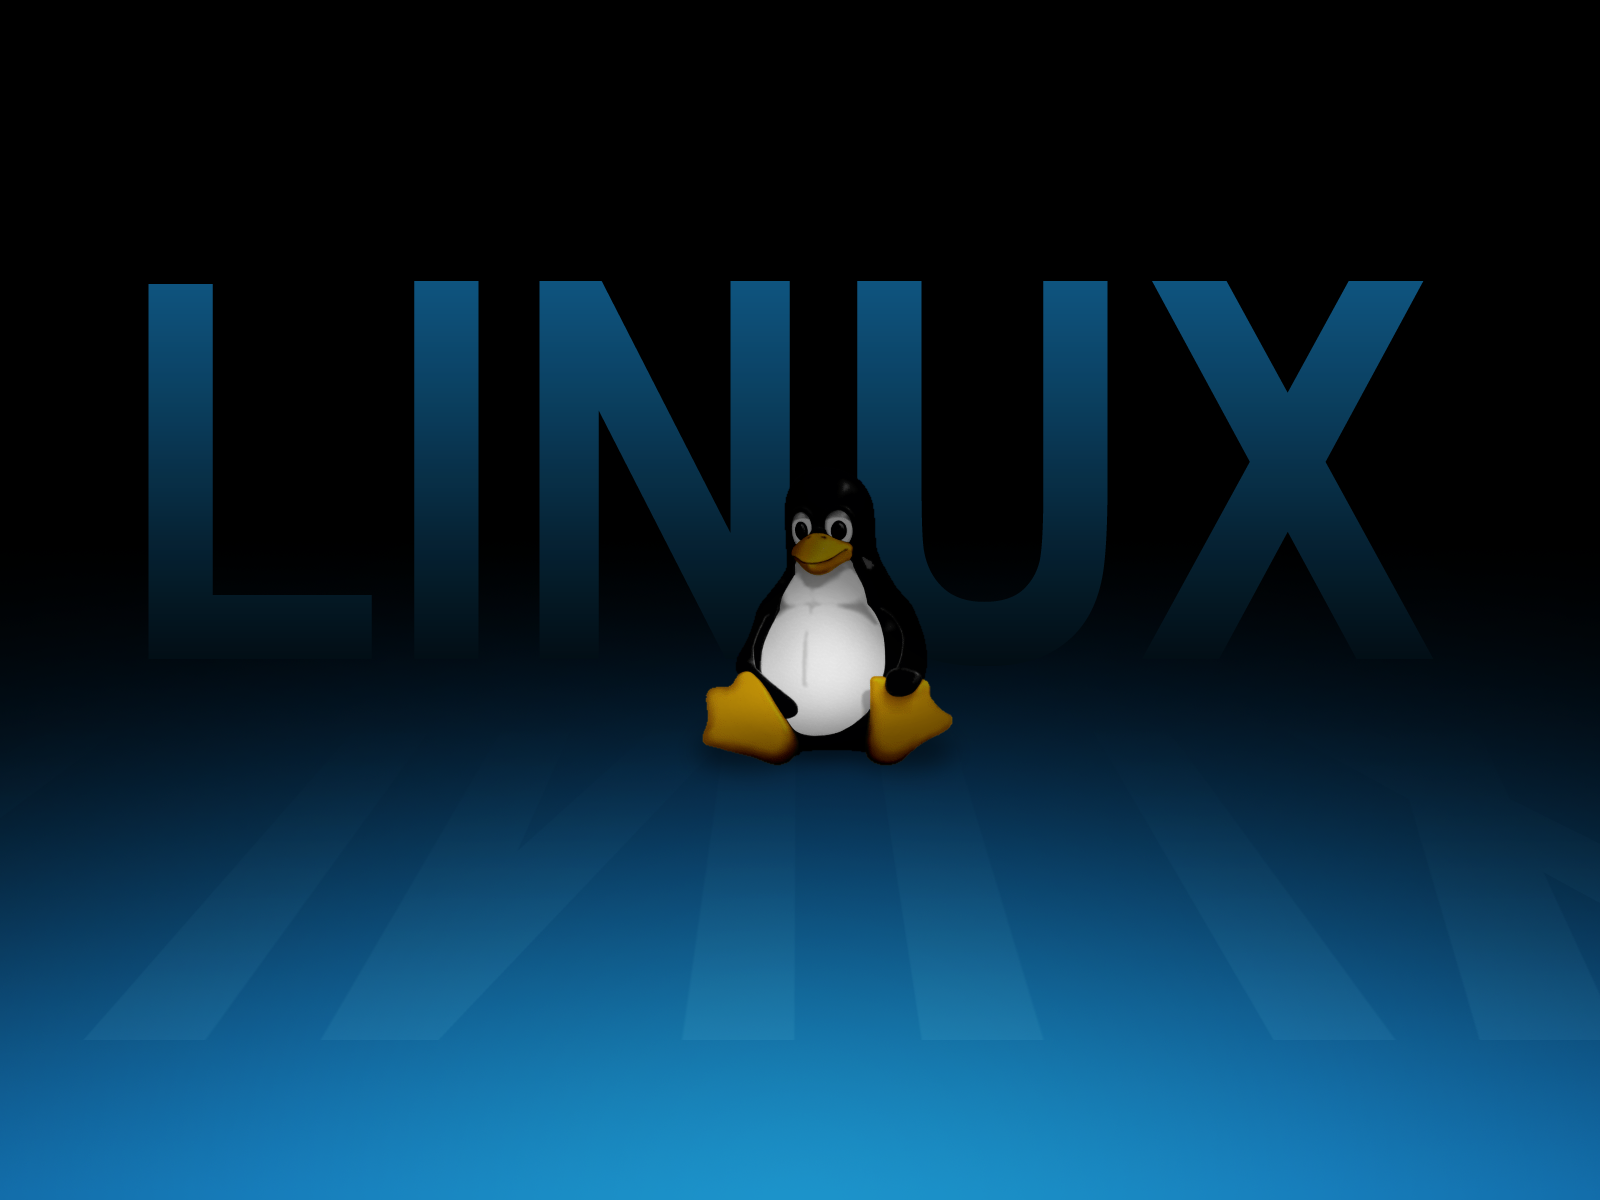 40 Wallpaper Designs Featuring the Linux Mascot | Webdesign Core